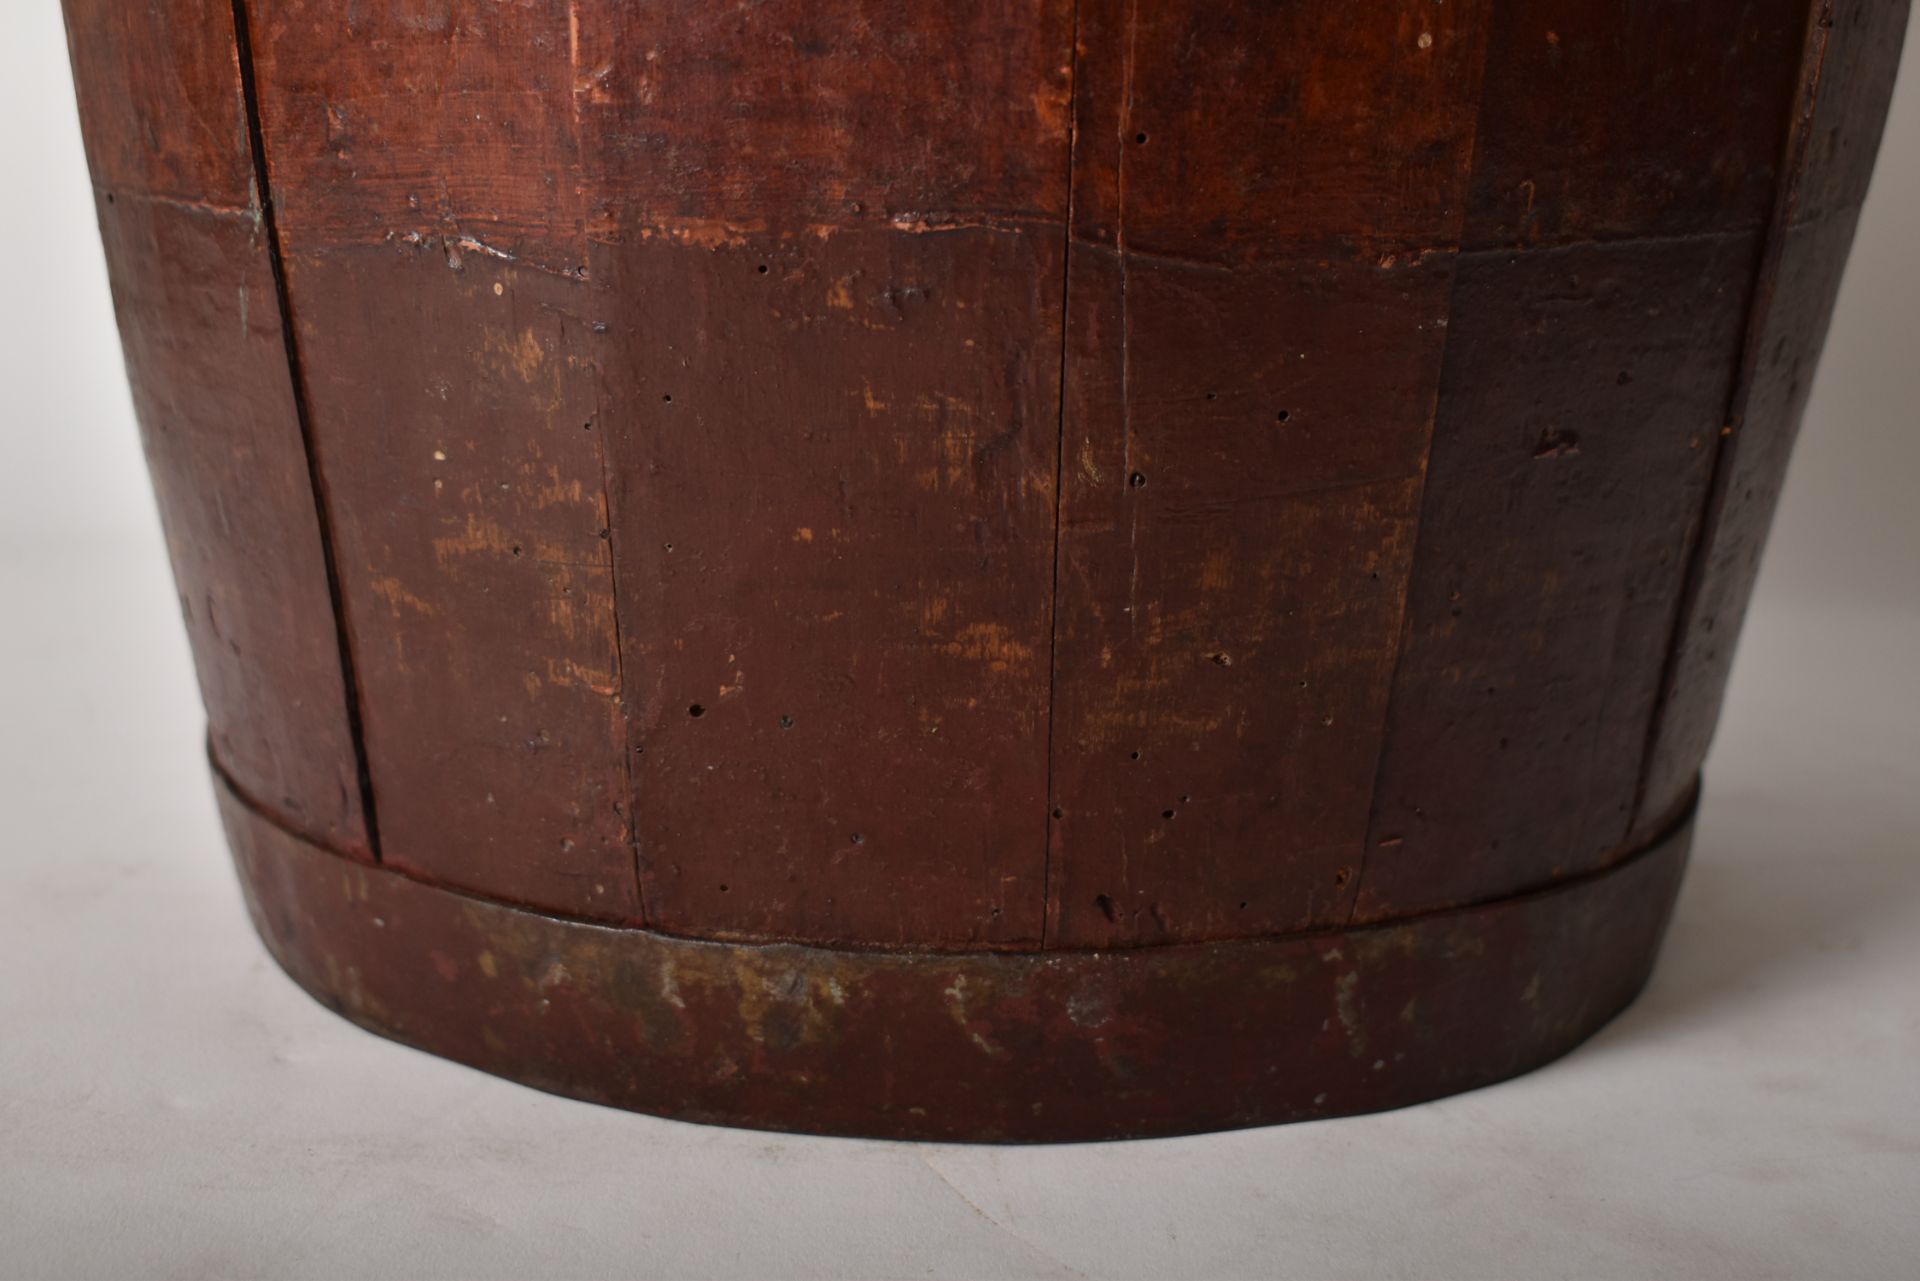 LARGE 19TH CENTURY SHIPPING SPICE BARREL WITH LID - Image 4 of 6